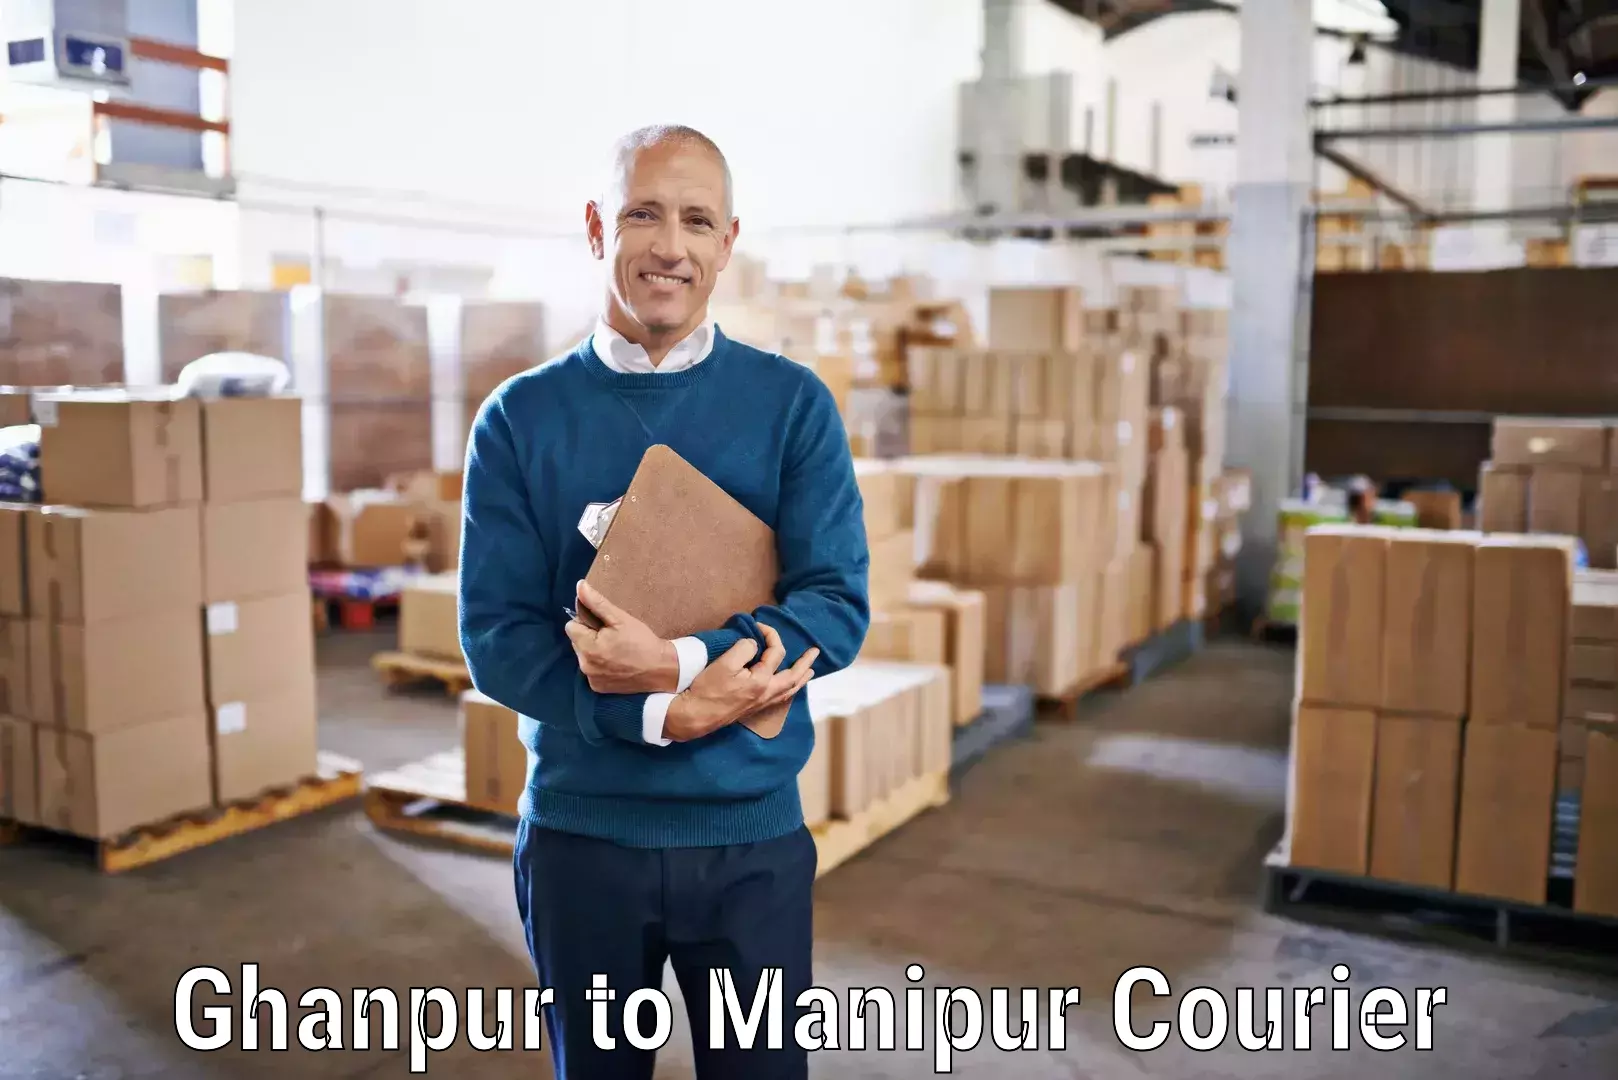 State-of-the-art courier technology Ghanpur to Kanti